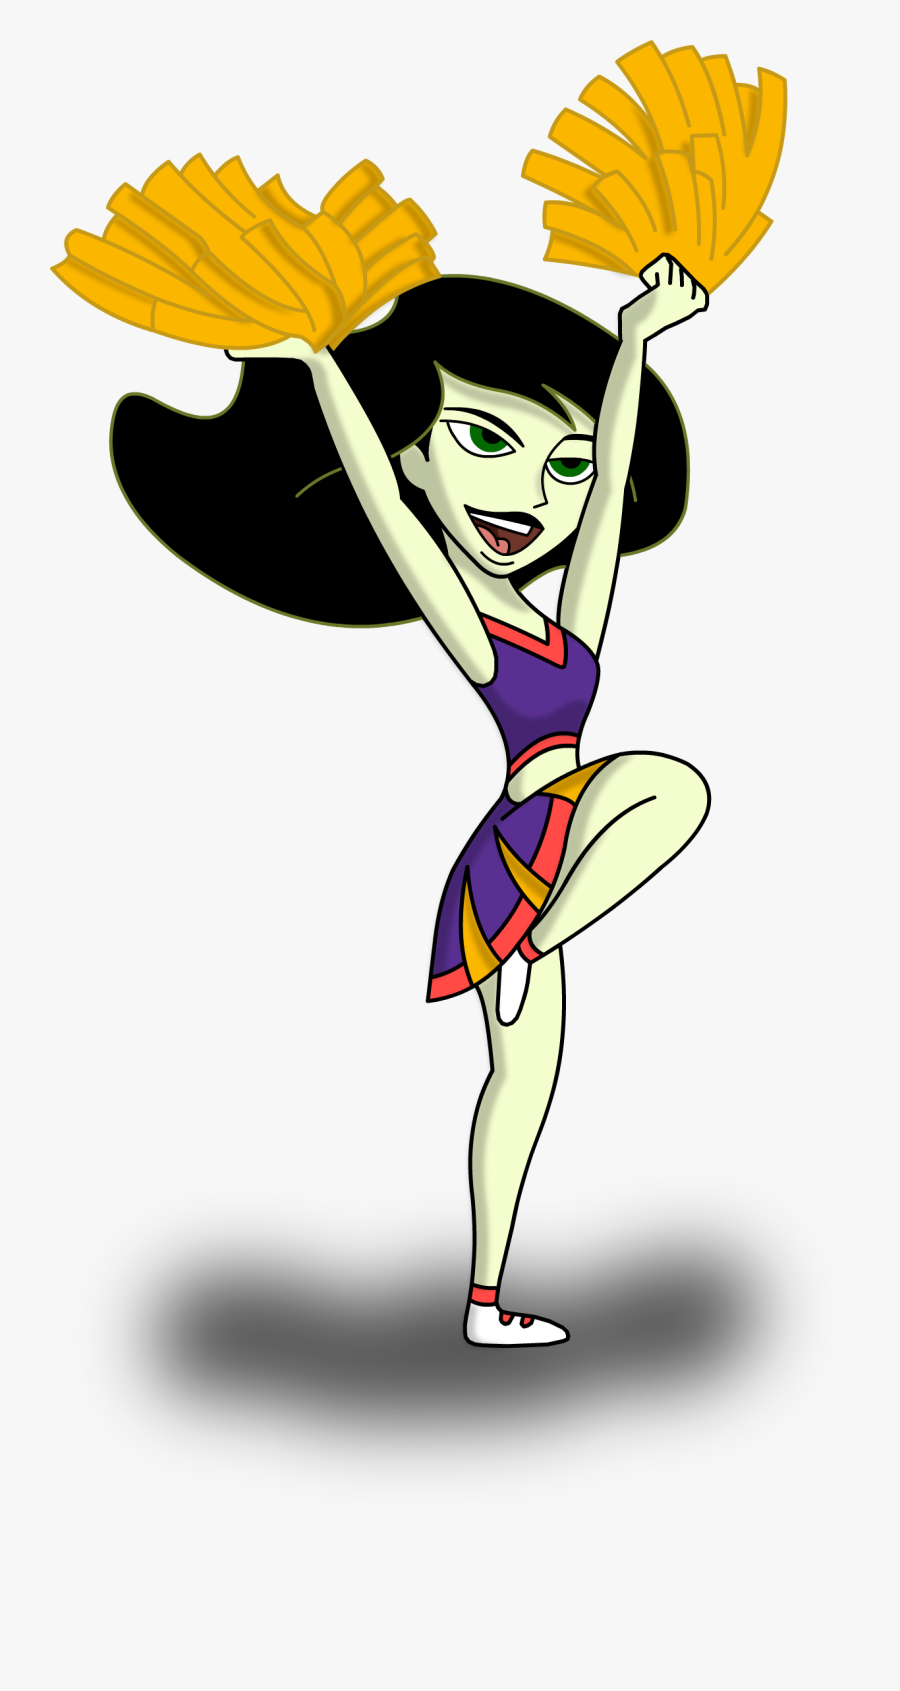 Free Download Cheerleader Clipart Black And White - Kim Possible Shego Cheerleader, Transparent Clipart